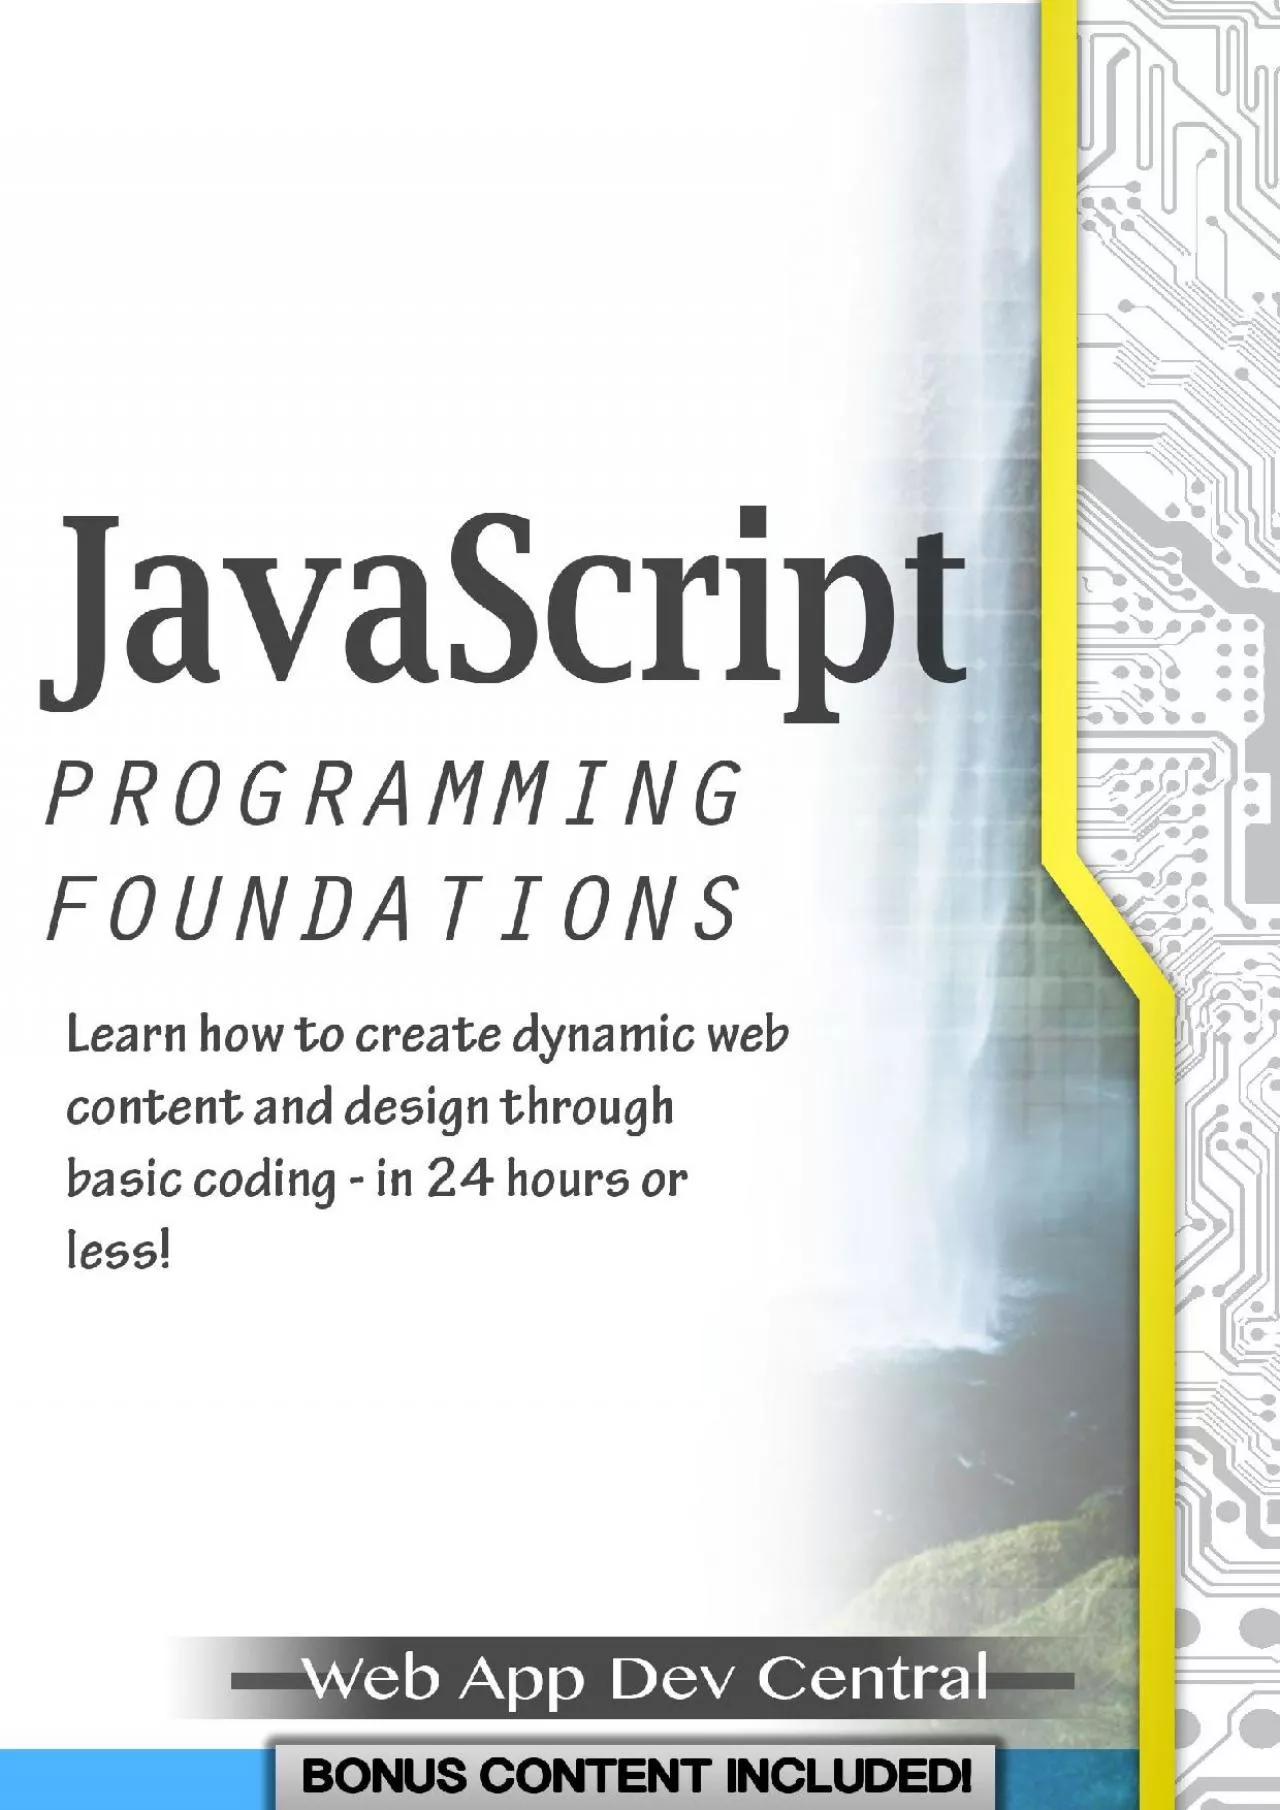 (EBOOK)-JAVASCRIPT: PROGRAMMING FOUNDATIONS (Bonus Content Included): Learn how to create